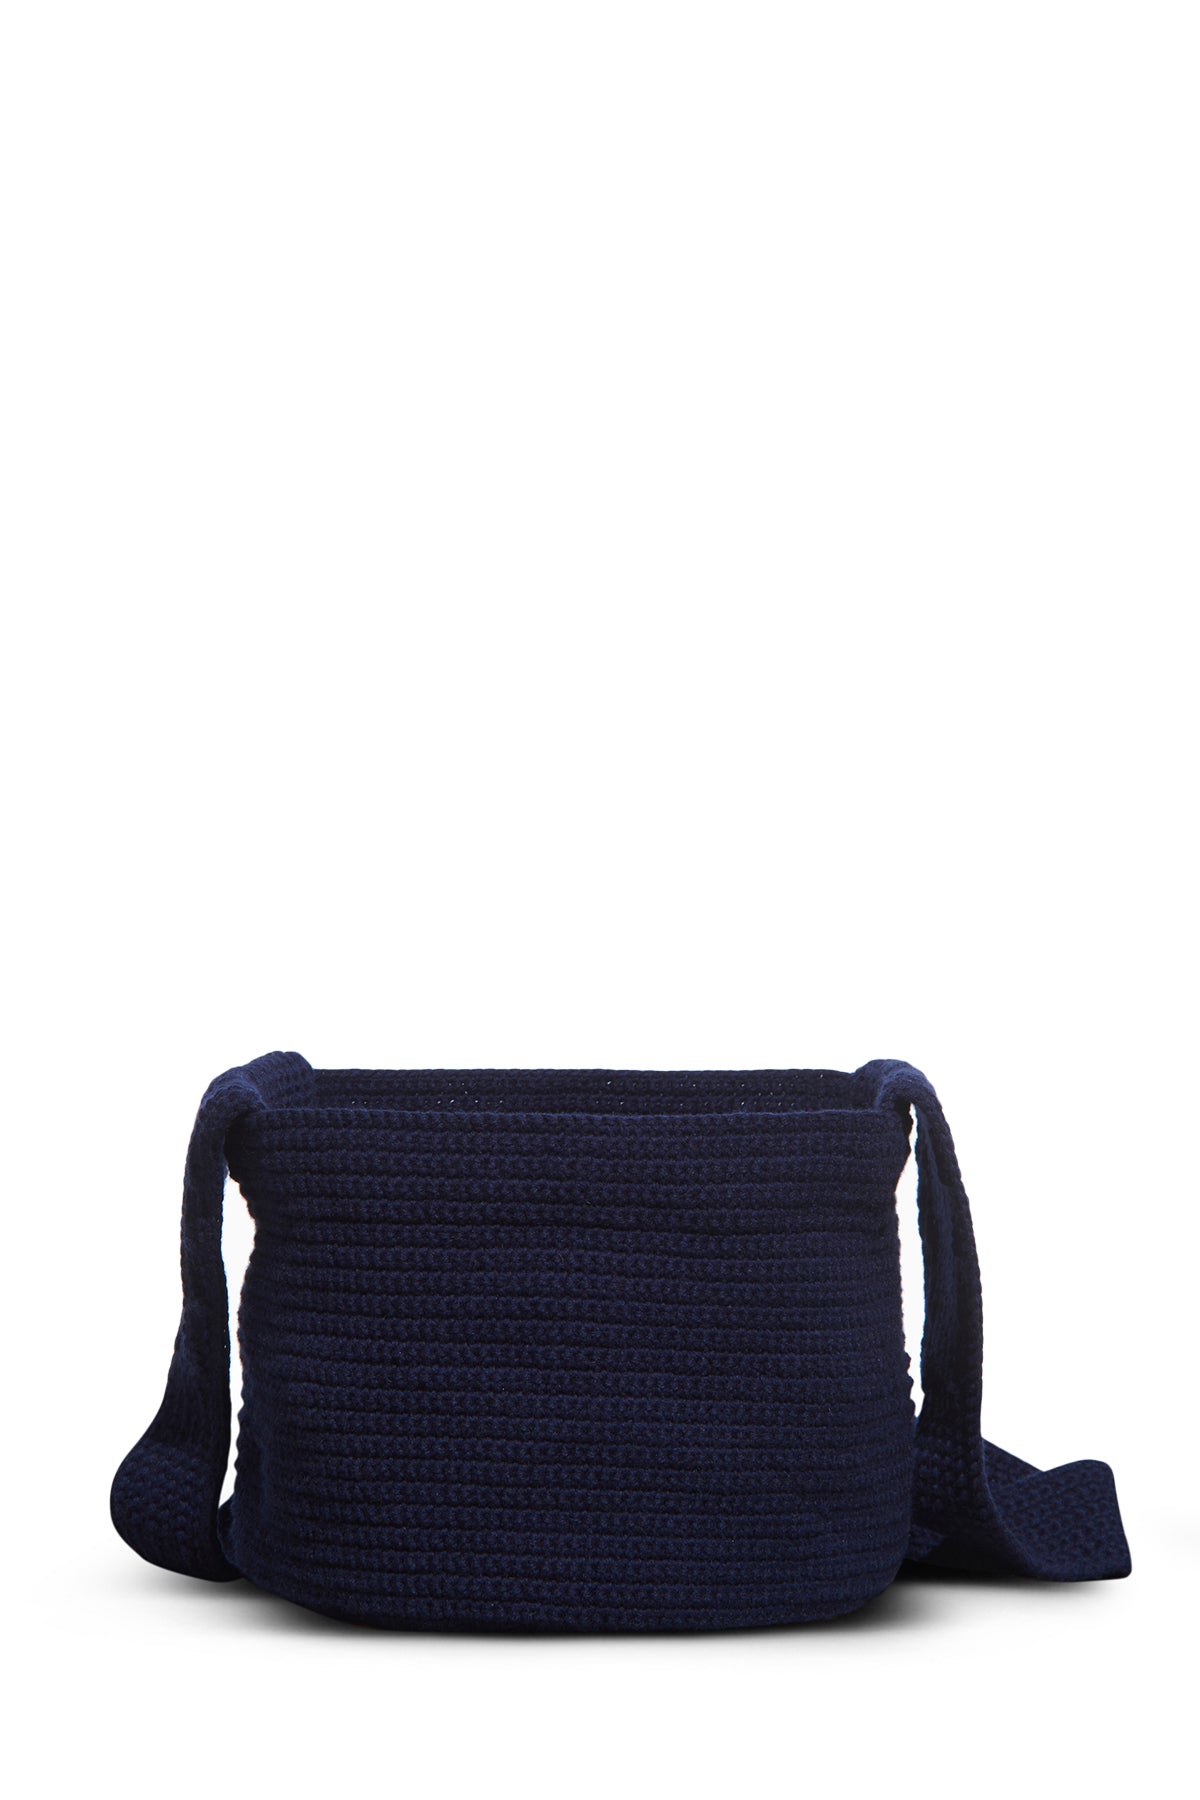 Crossover Knit Bag in Navy Cashmere